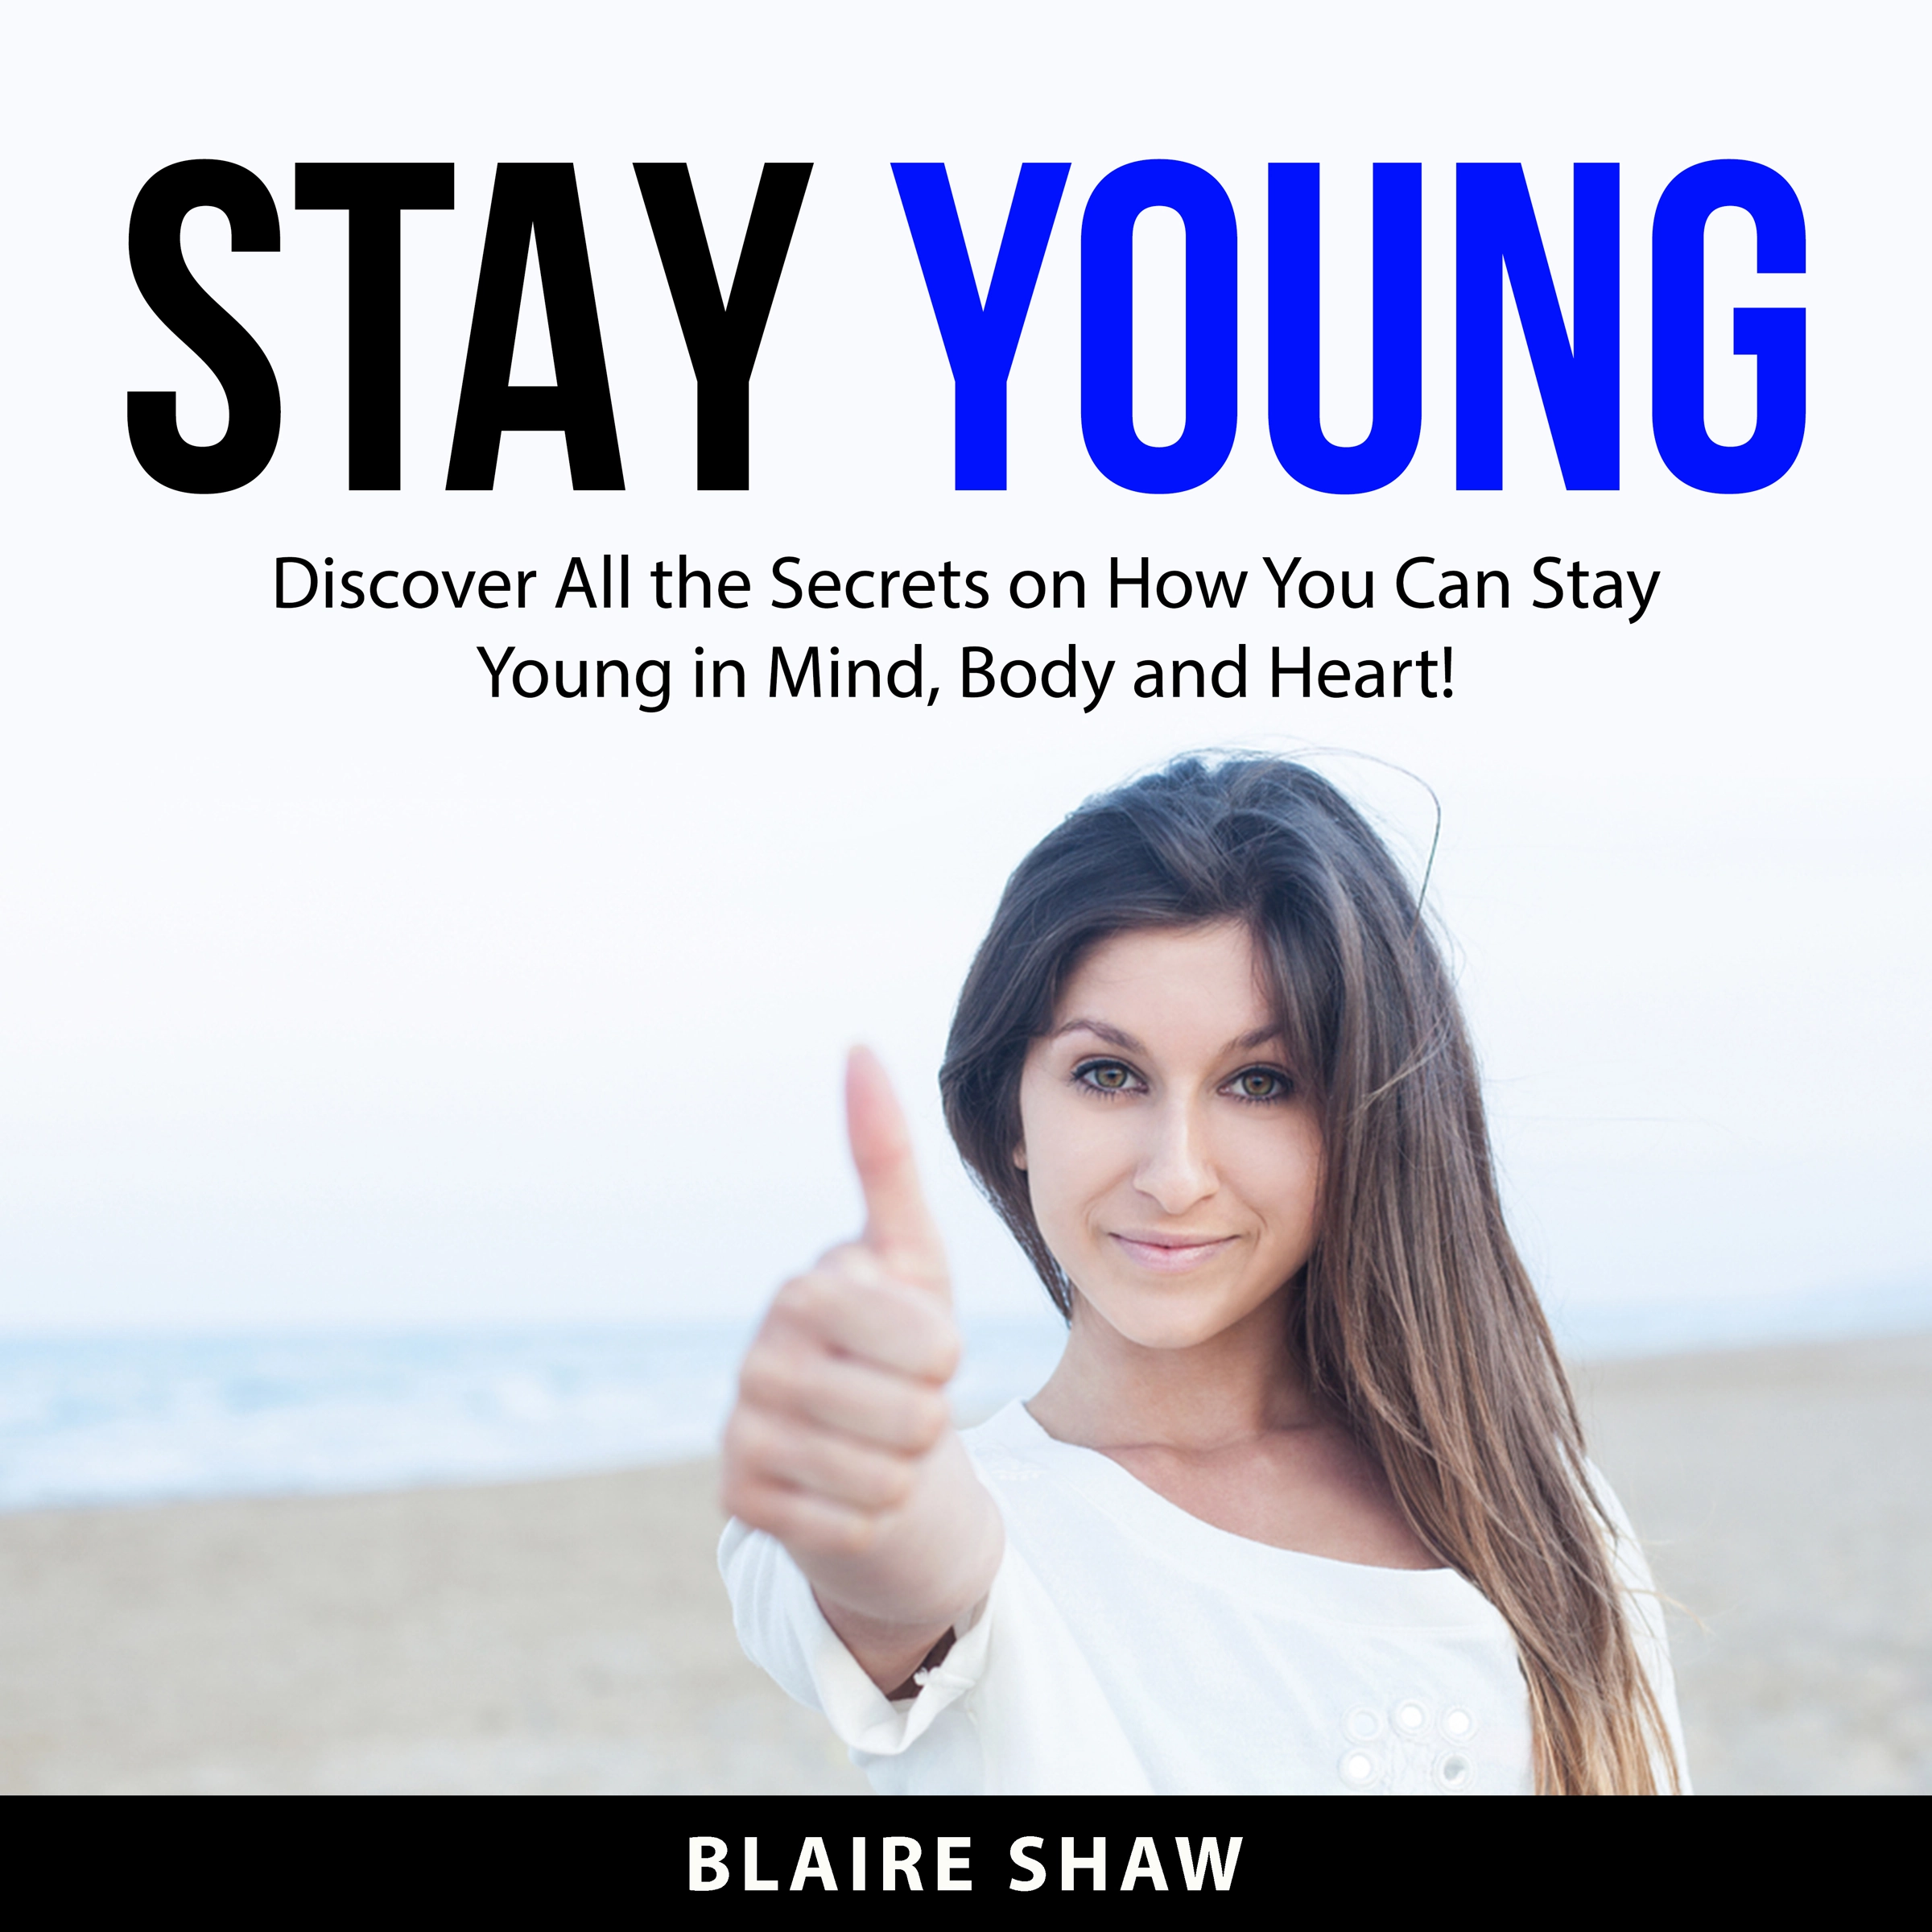 Stay Young by Blaire Shaw Audiobook